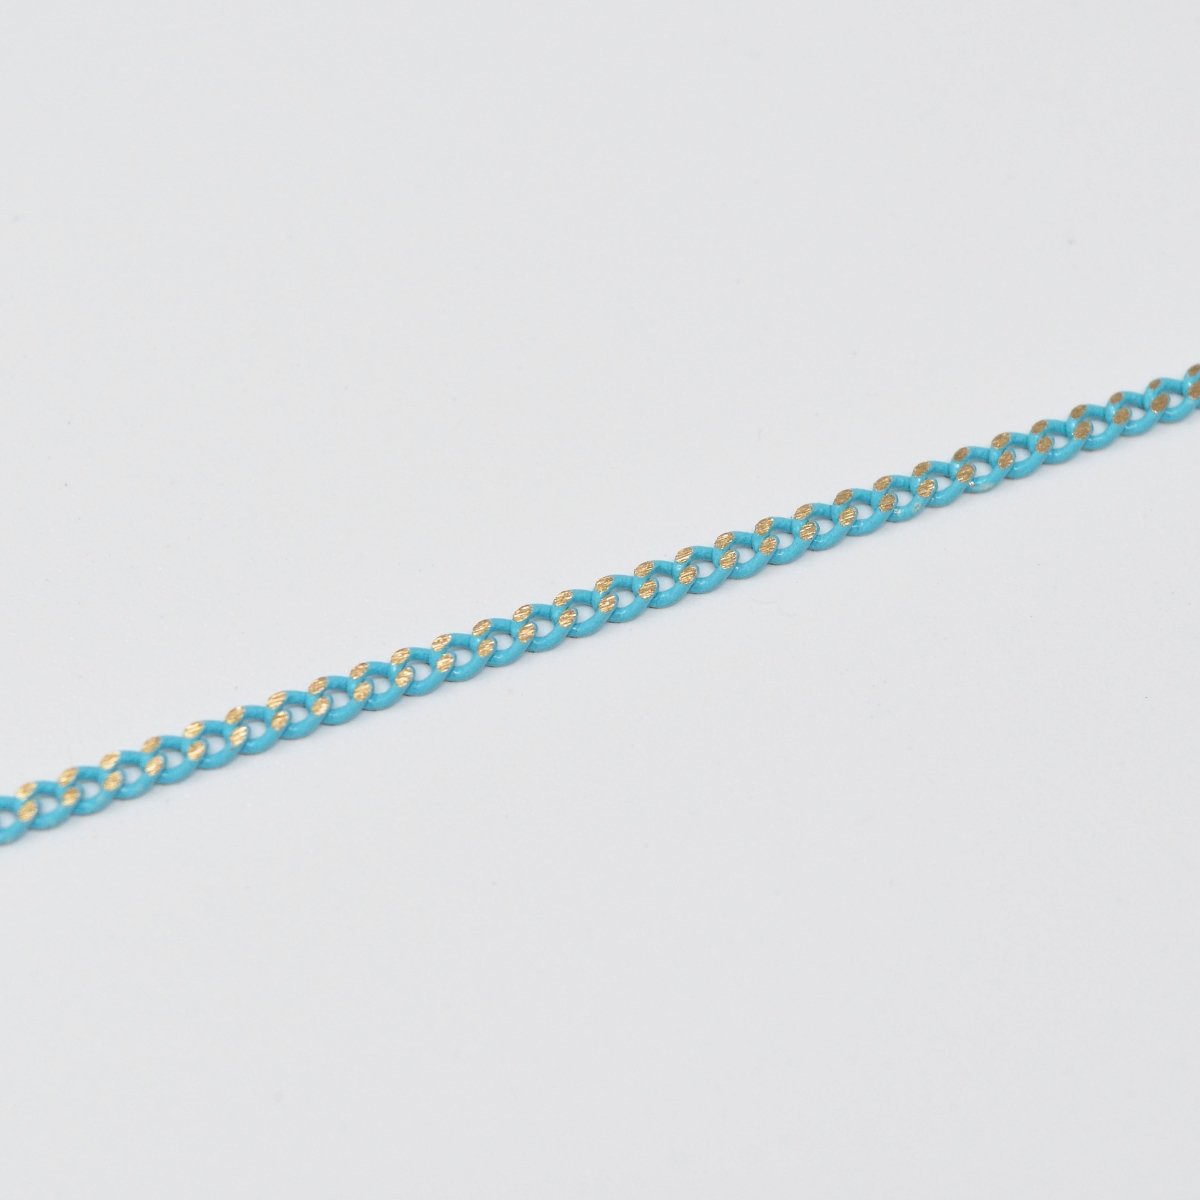 Teal Matte gleaming gold Cuban Curb Chain by Yard, Florida Link Chain, Wholesale bulk Roll Chain for Jewelry Making, Width 1.8mm | ROLL-442 Clearance Pricing - DLUXCA